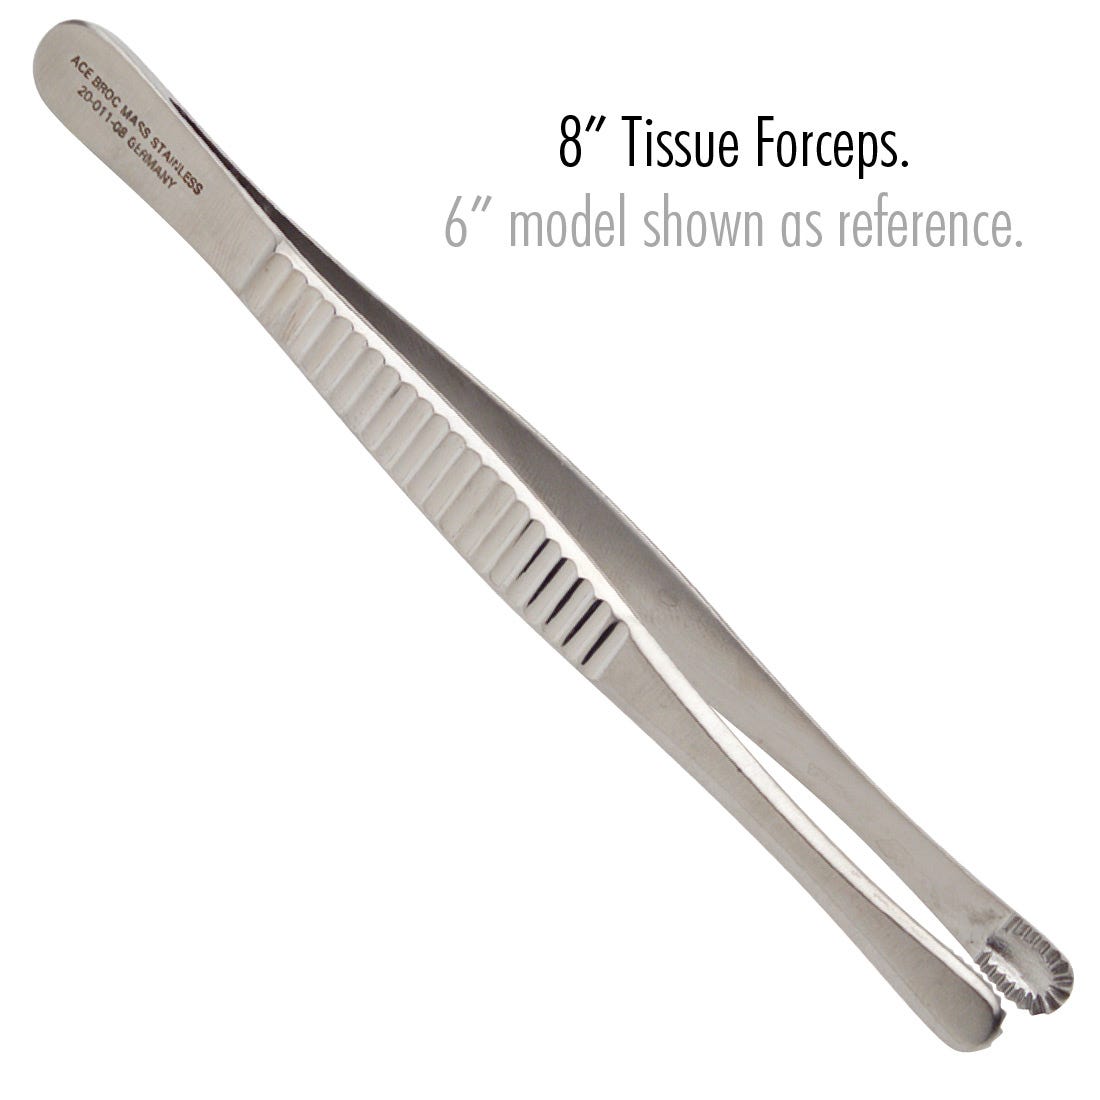 ACE Russian Tissue Forceps, 8", 20cm